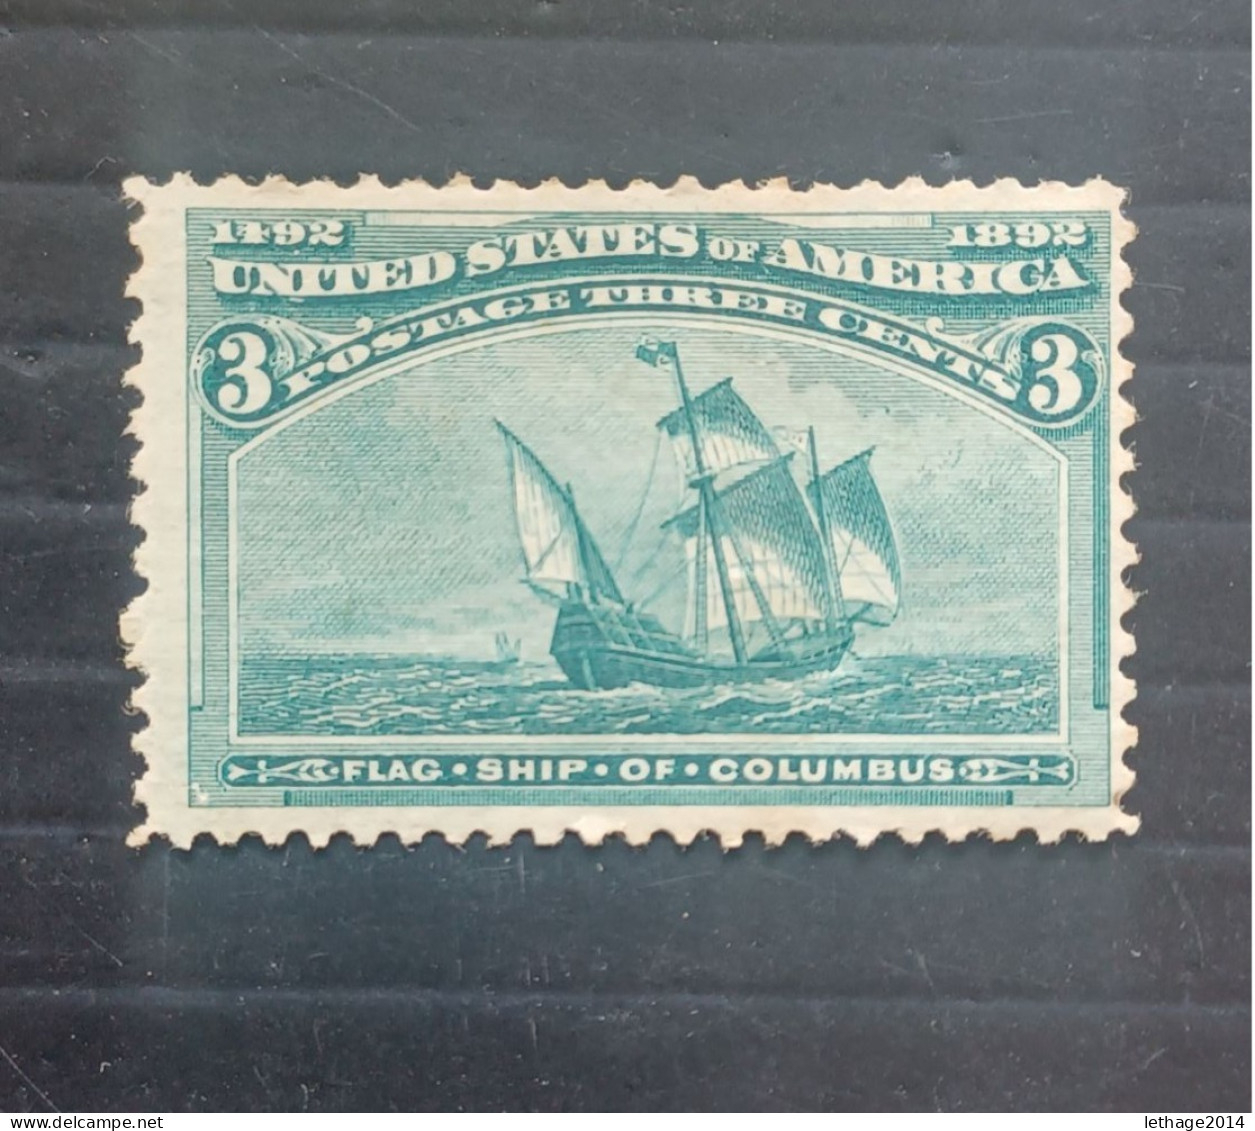 UNITED STATE 1893 COLUMBIAN EXPOSITION MNHL + BIG STOCK LOT MIX 85 SCANNERS PERFIN TAX WASHINGTON STAMPS MNH FRAGMANT - Nuevos